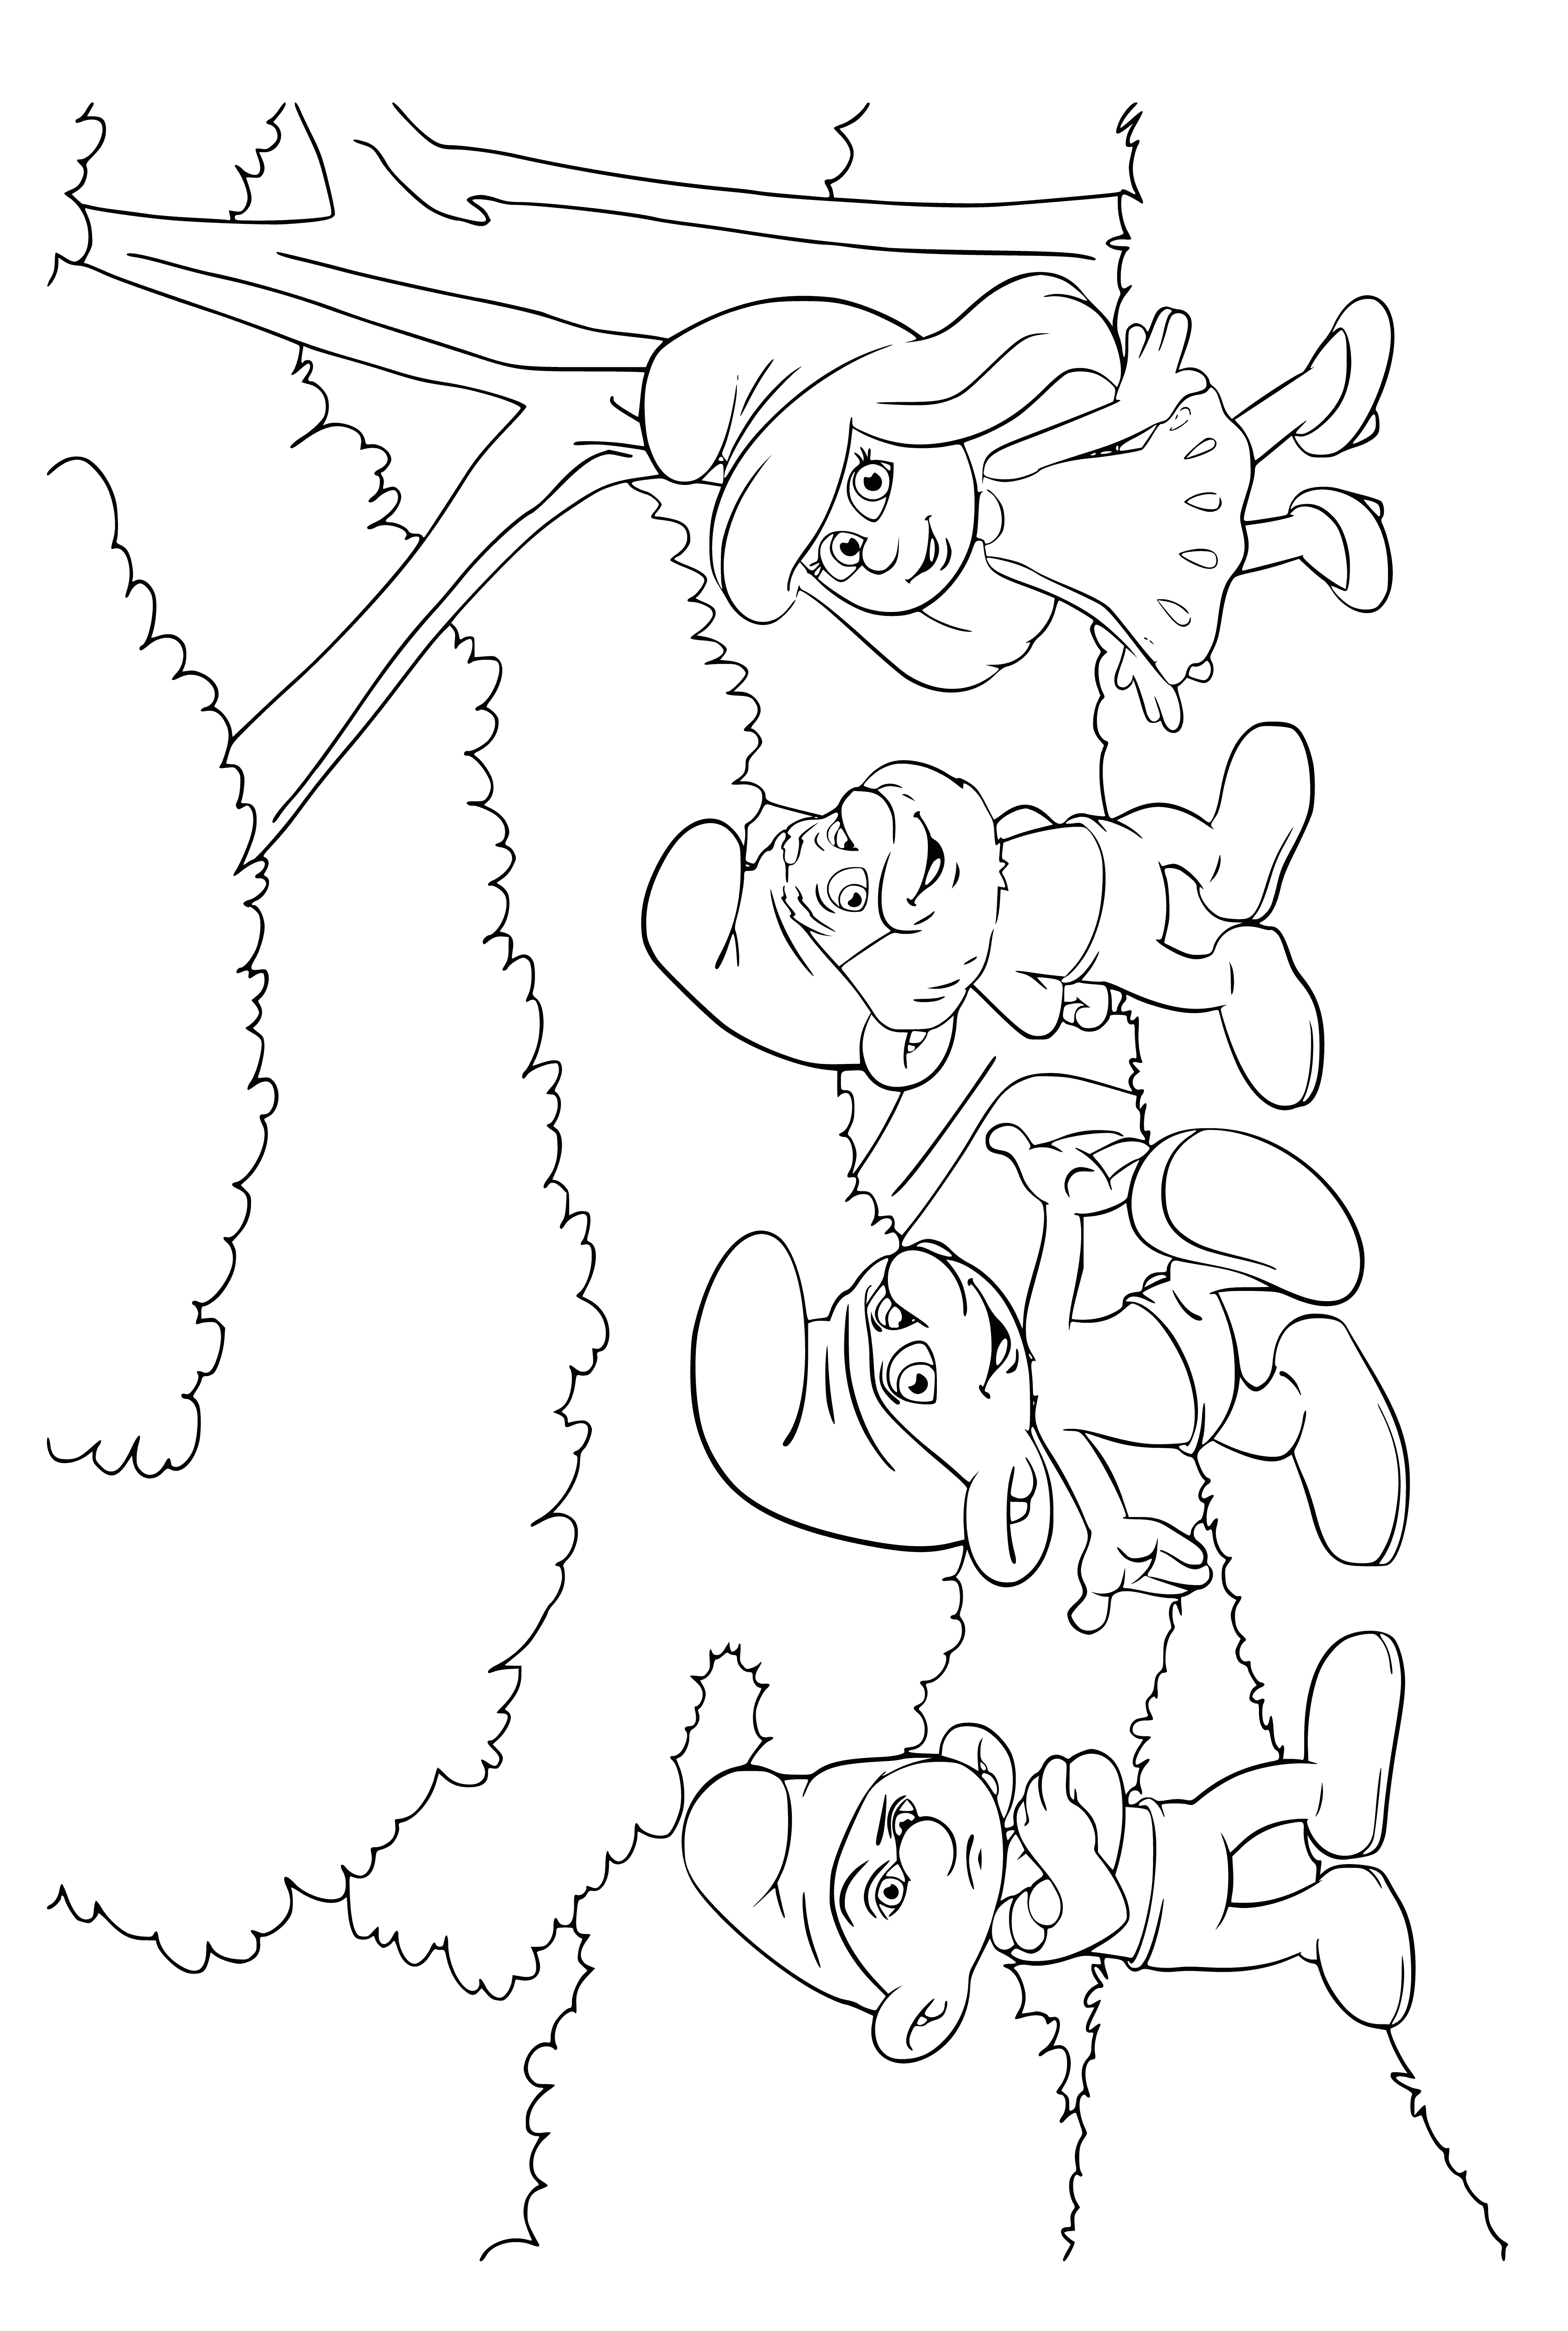 coloring page: The Smurfs are friendly forest dwellers who love to sing and dance.